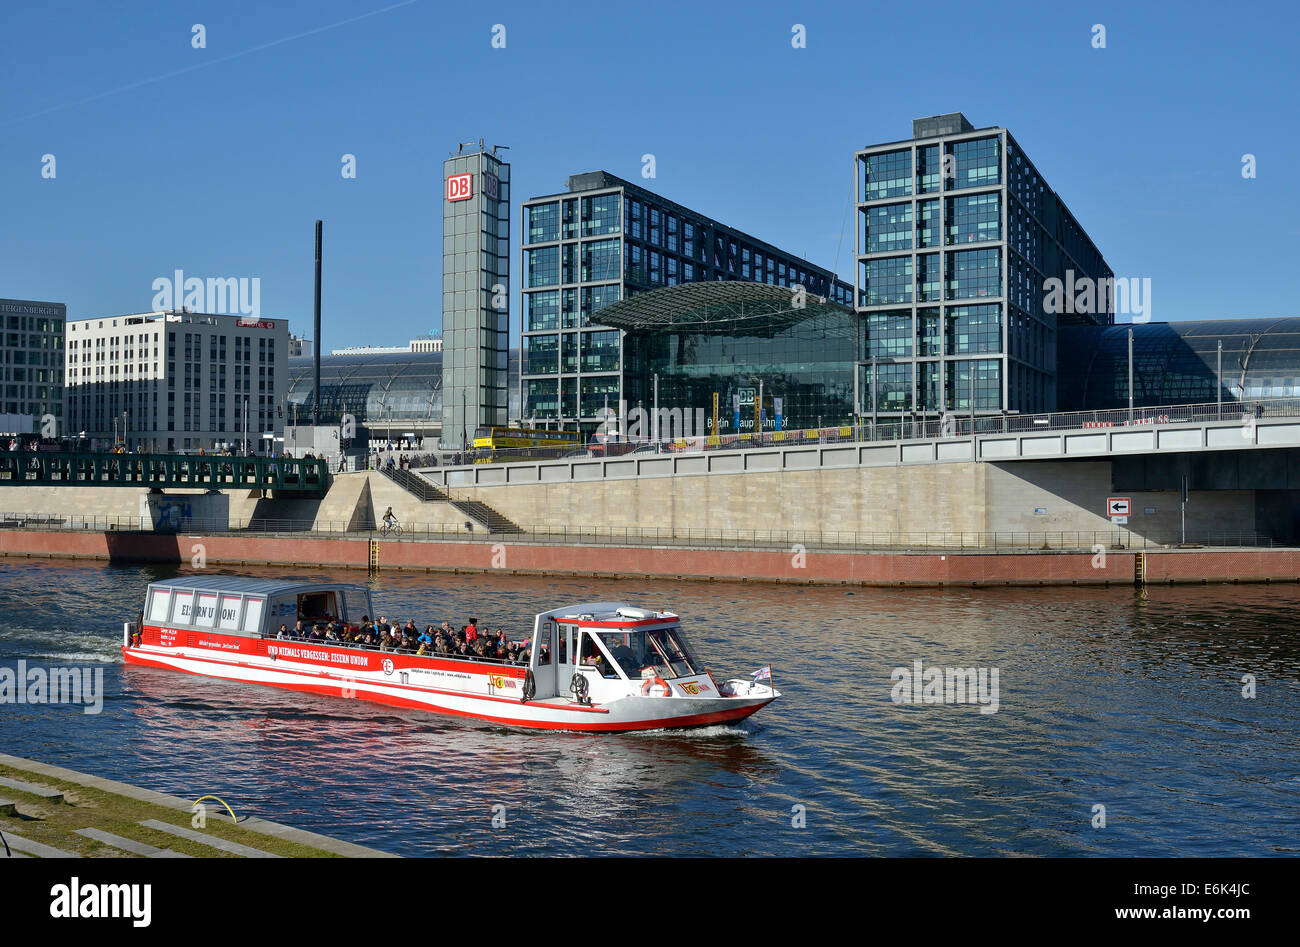 Excursion boat on the Spree River in front of Berlin Hauptbahnhof main railway station, Berlin, Germany Stock Photo